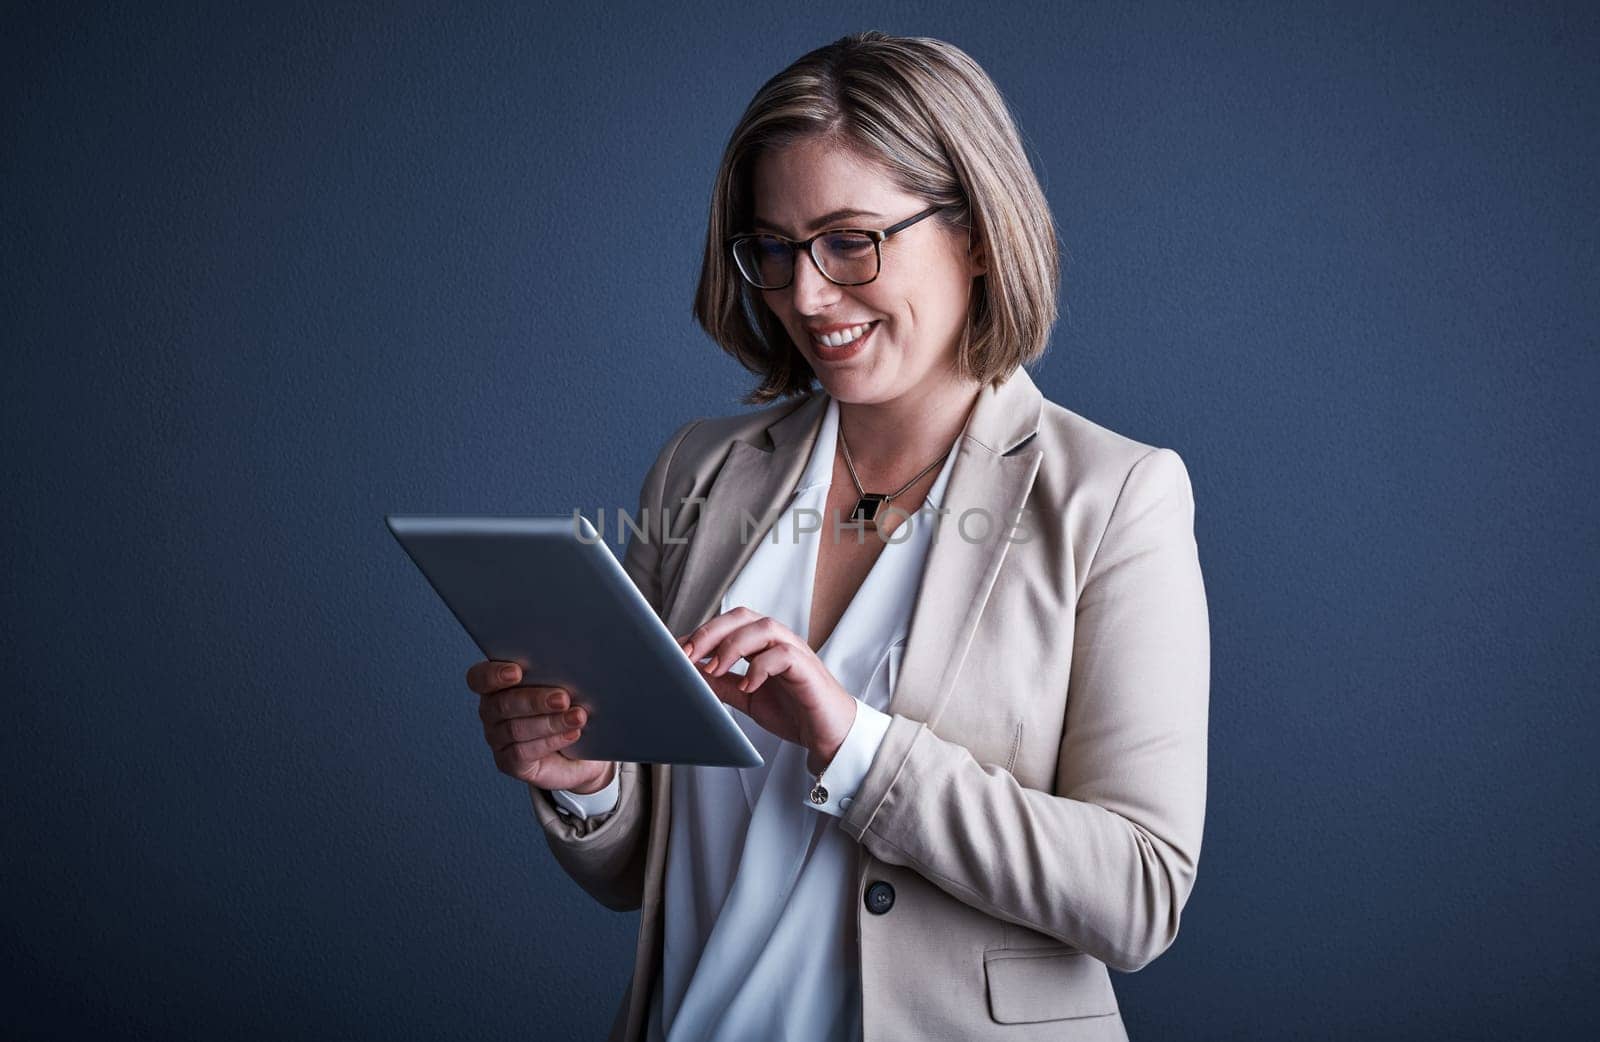 This is wonderful. Studio shot of an attractive young corporate businesswoman using a tablet against a dark background